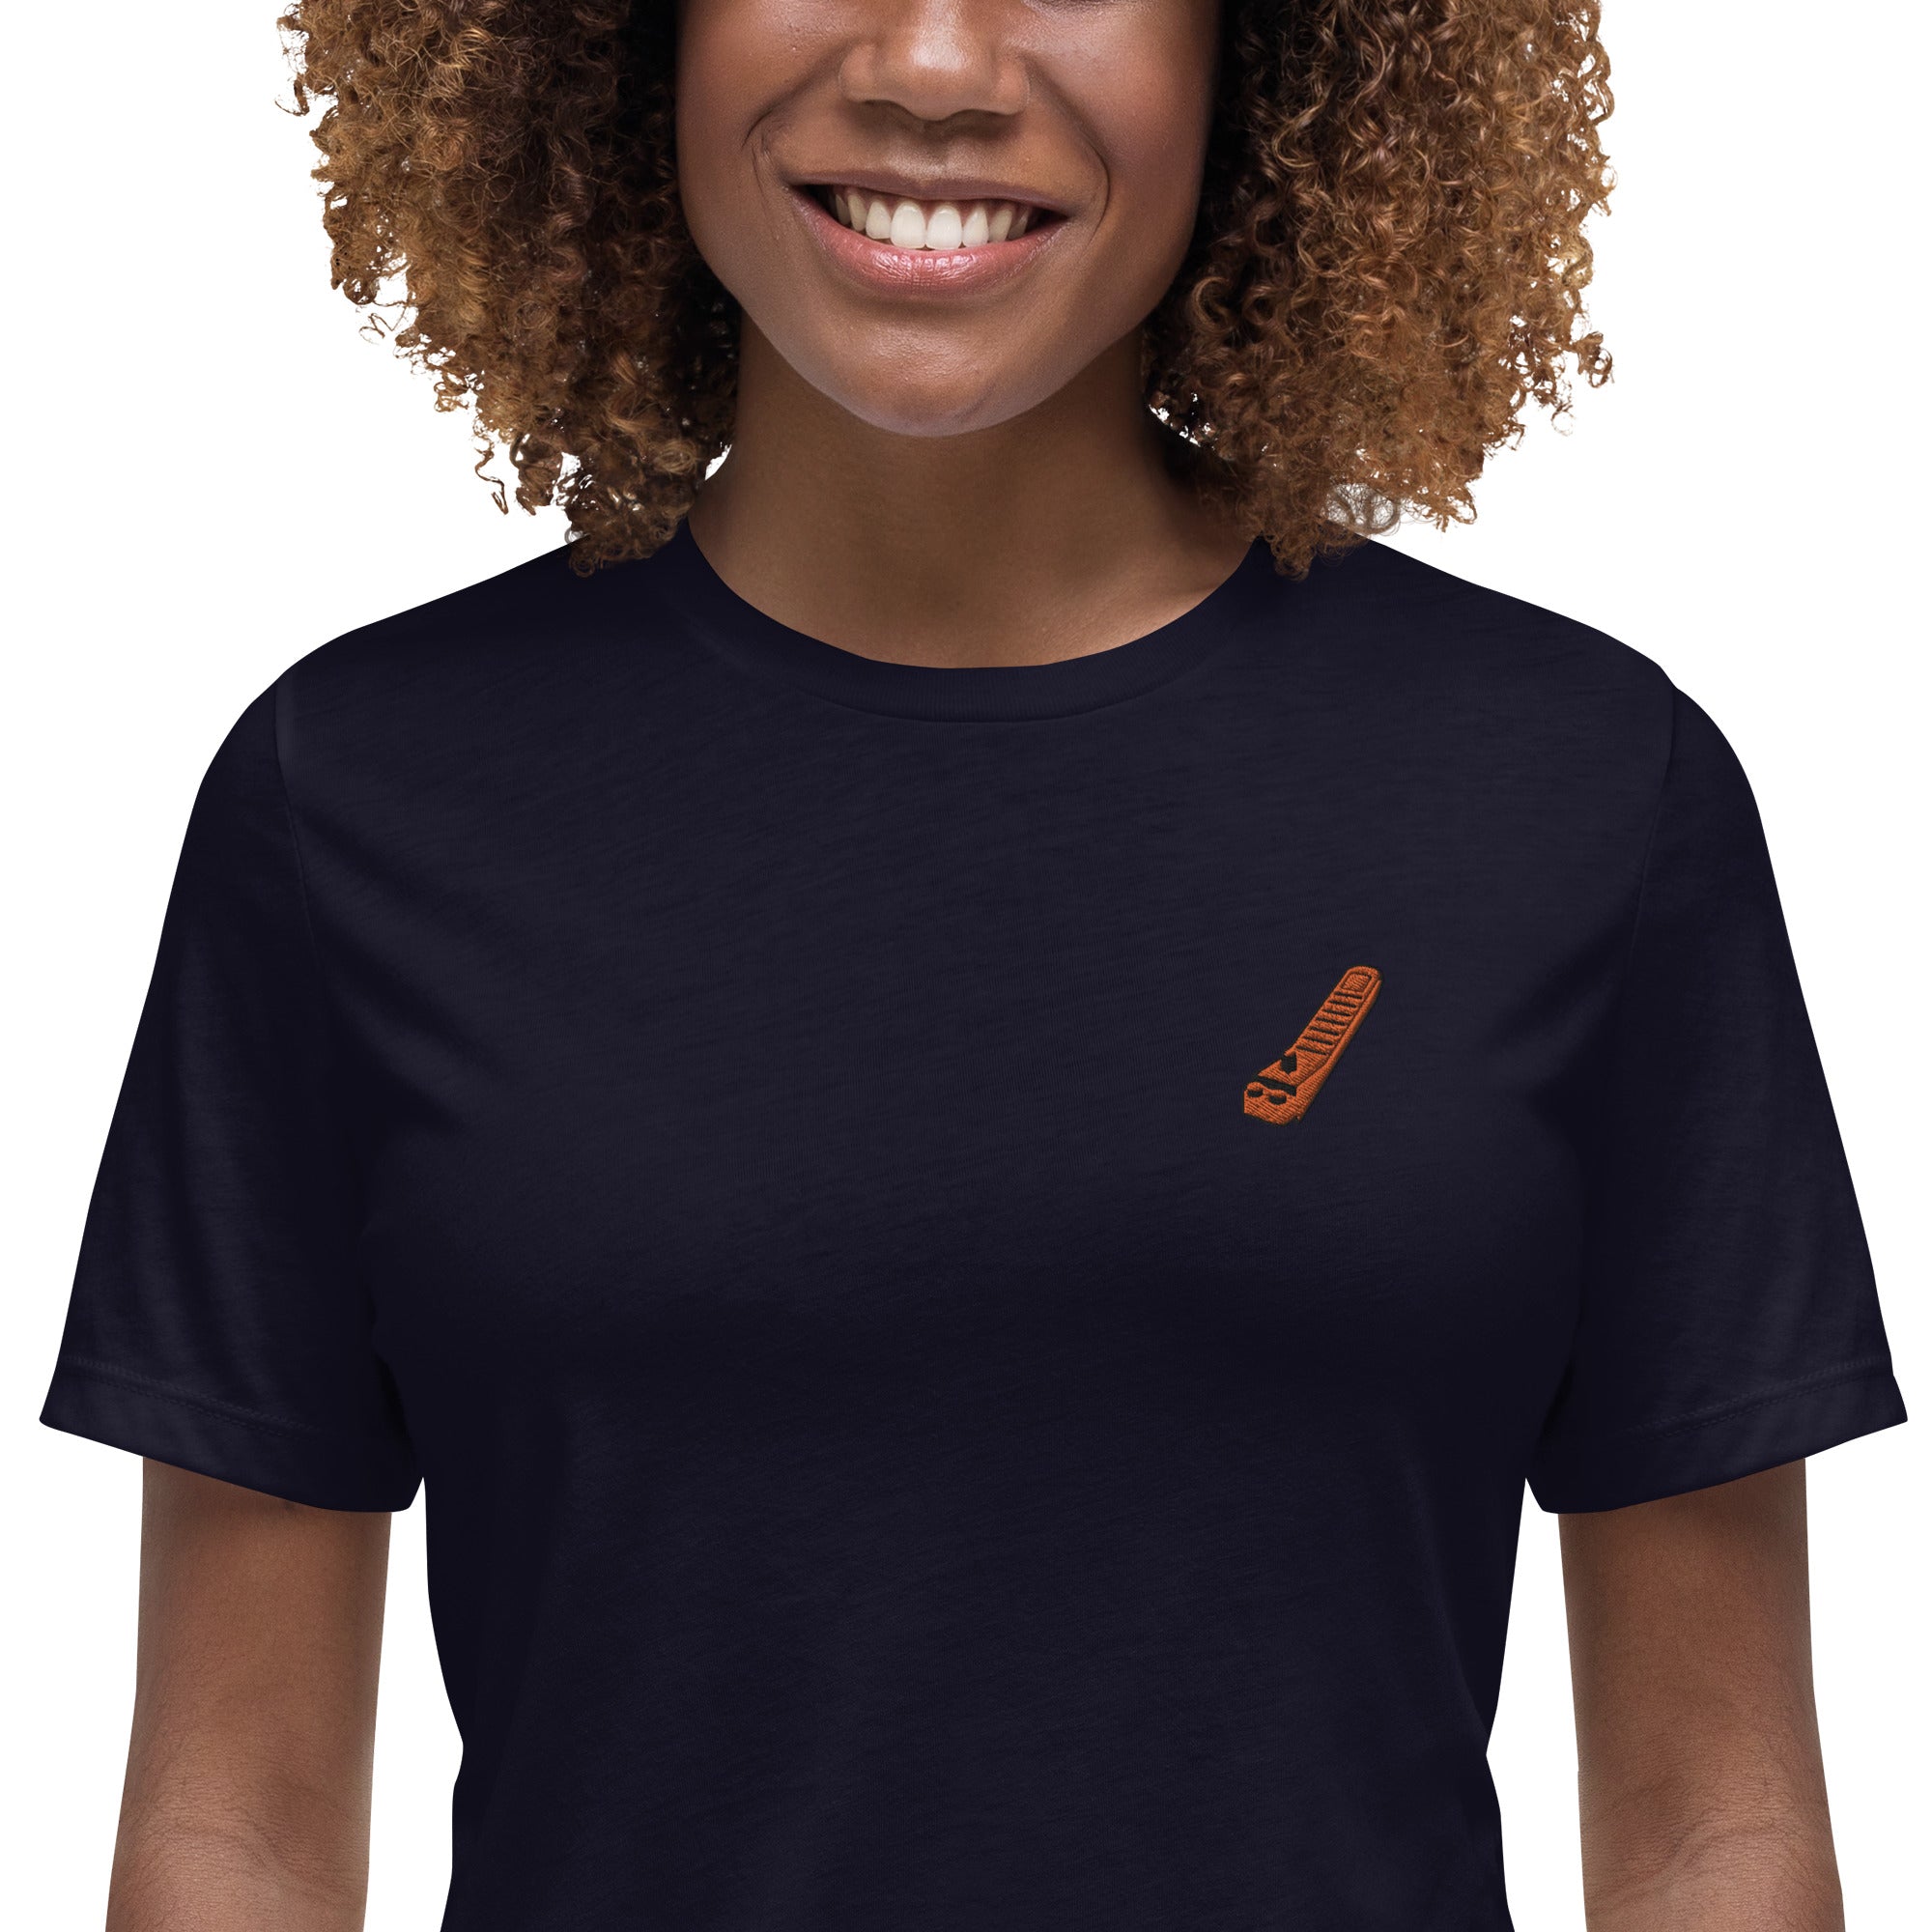 Brick Separator Women's Relaxed T-Shirt - Embroidered Design